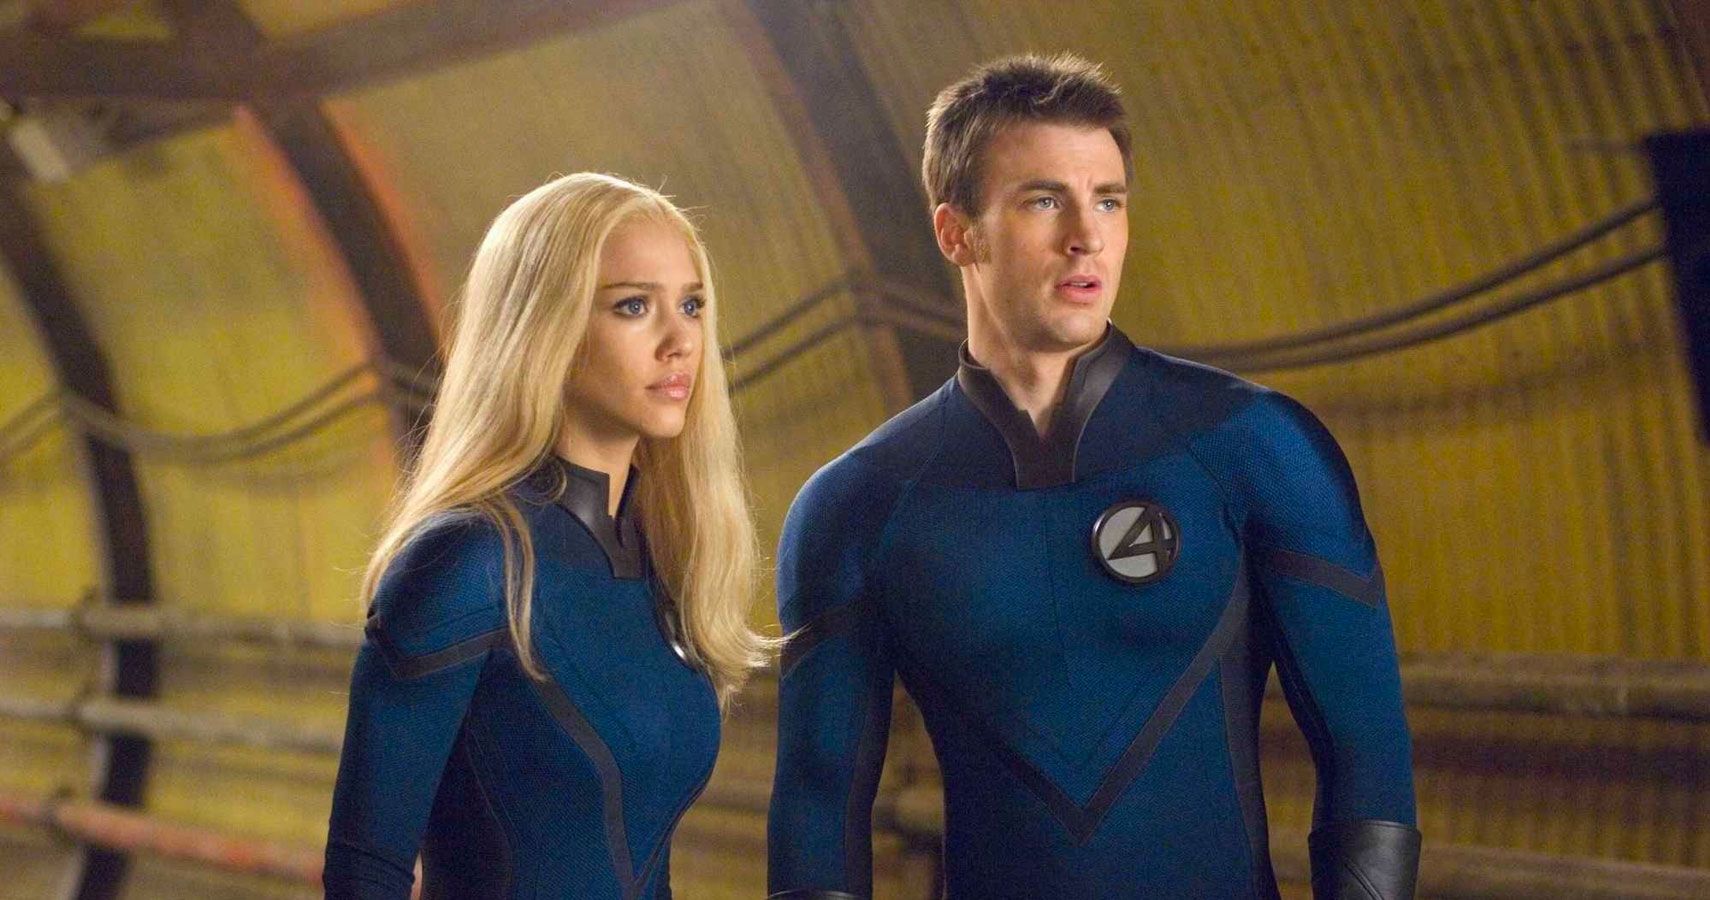 Jessica Alba and Chris Evans in The Fantastic Four